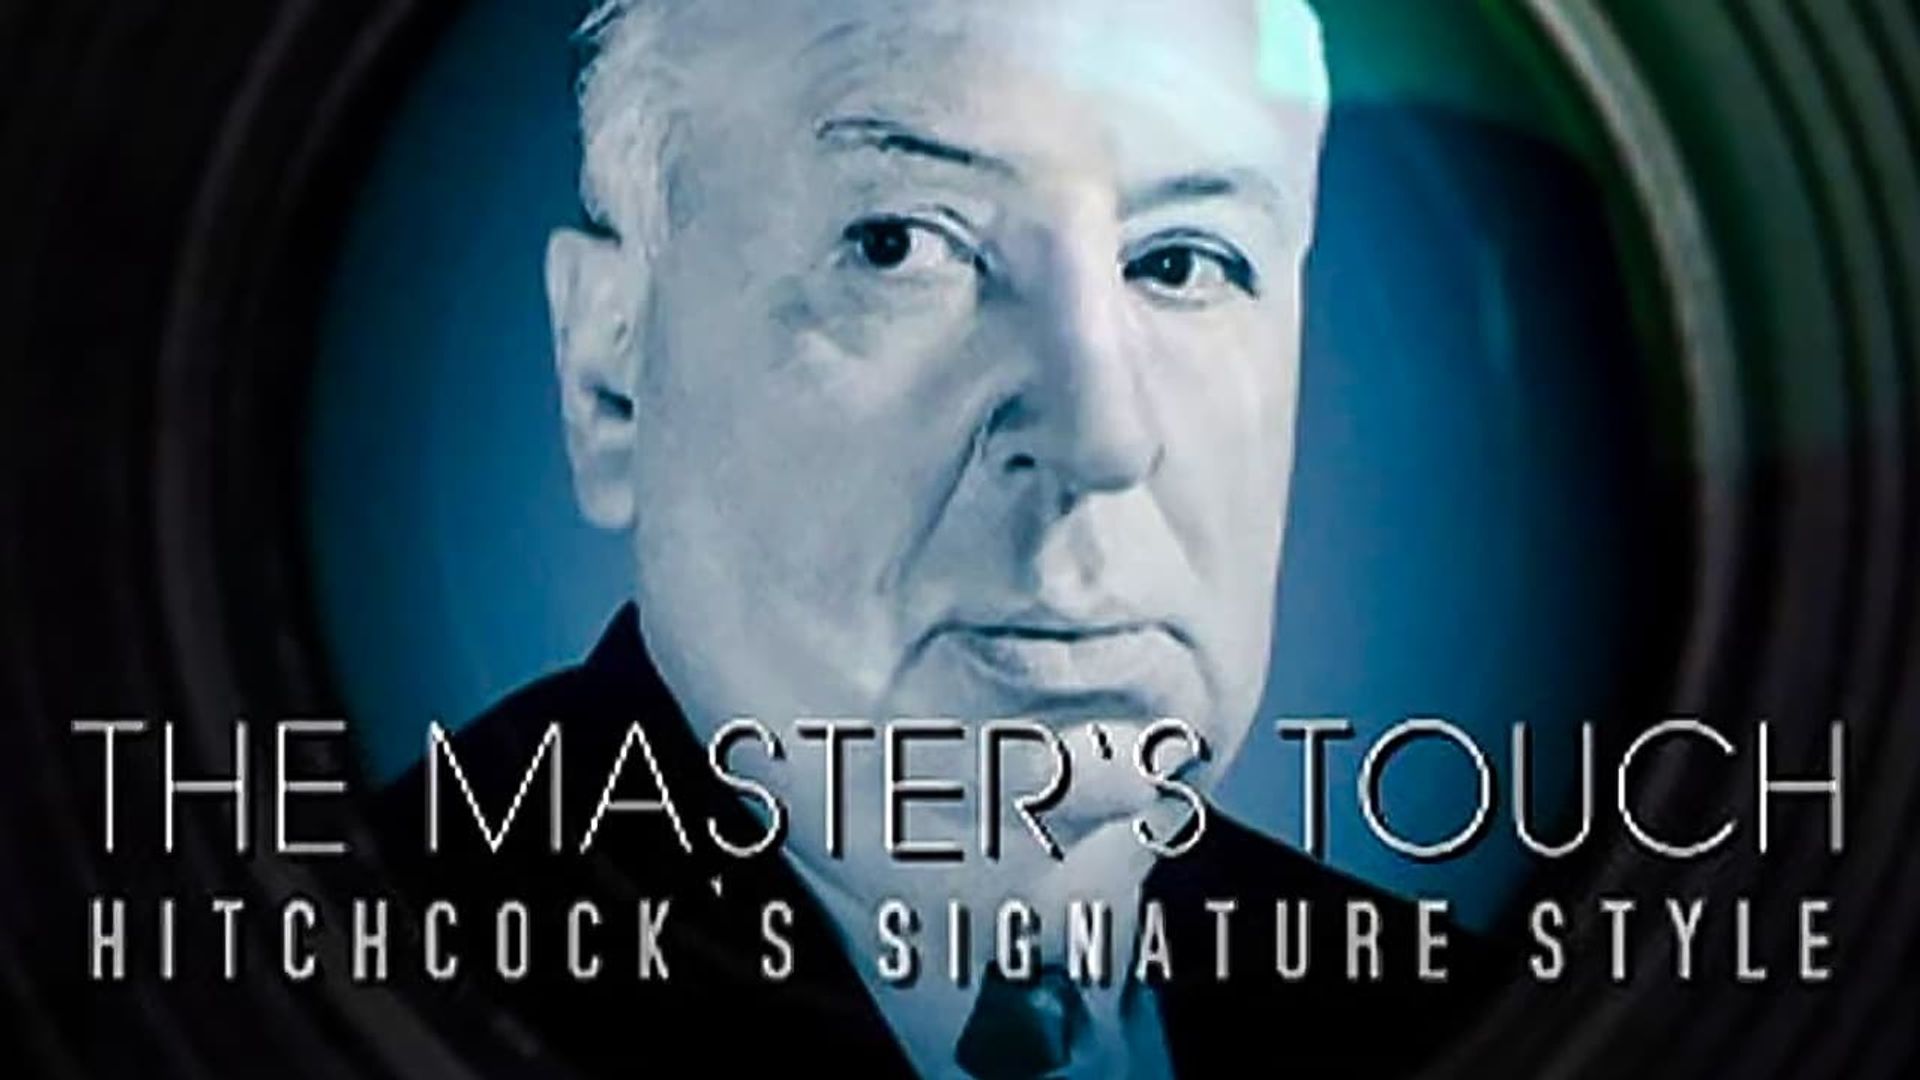 The Master's Touch: Hitchcock's Signature Style background